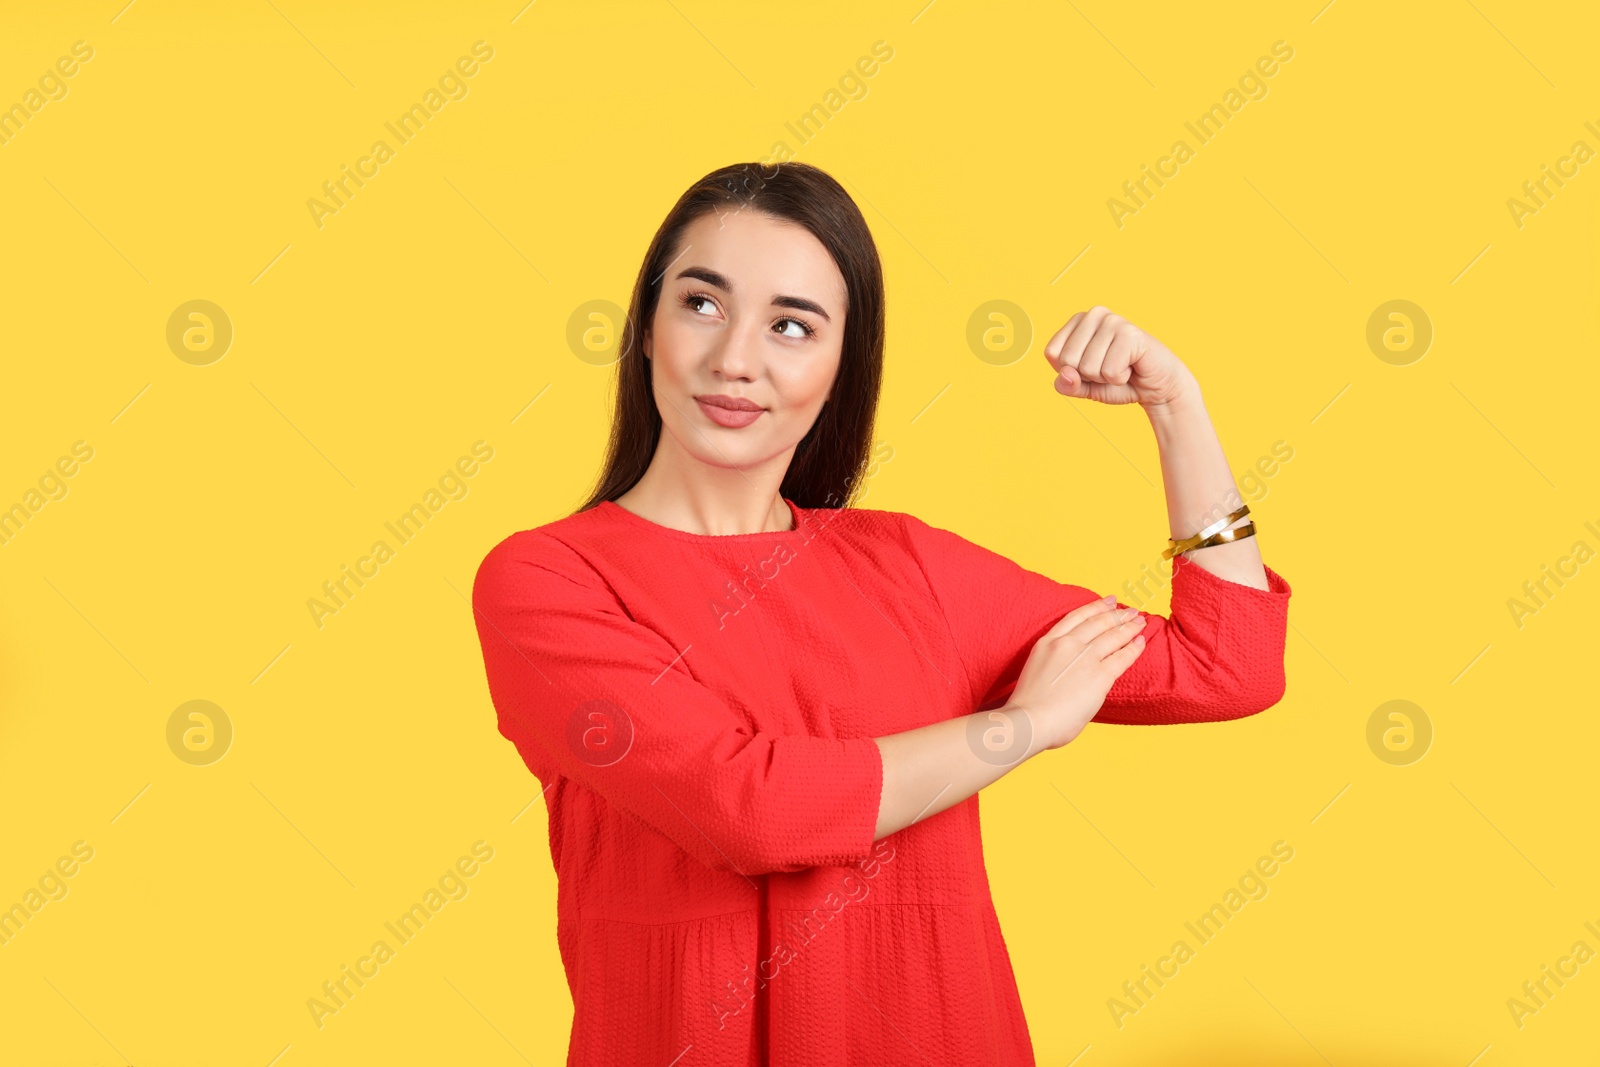 Photo of Emotional strong woman as symbol of girl power on yellow background. 8 March concept